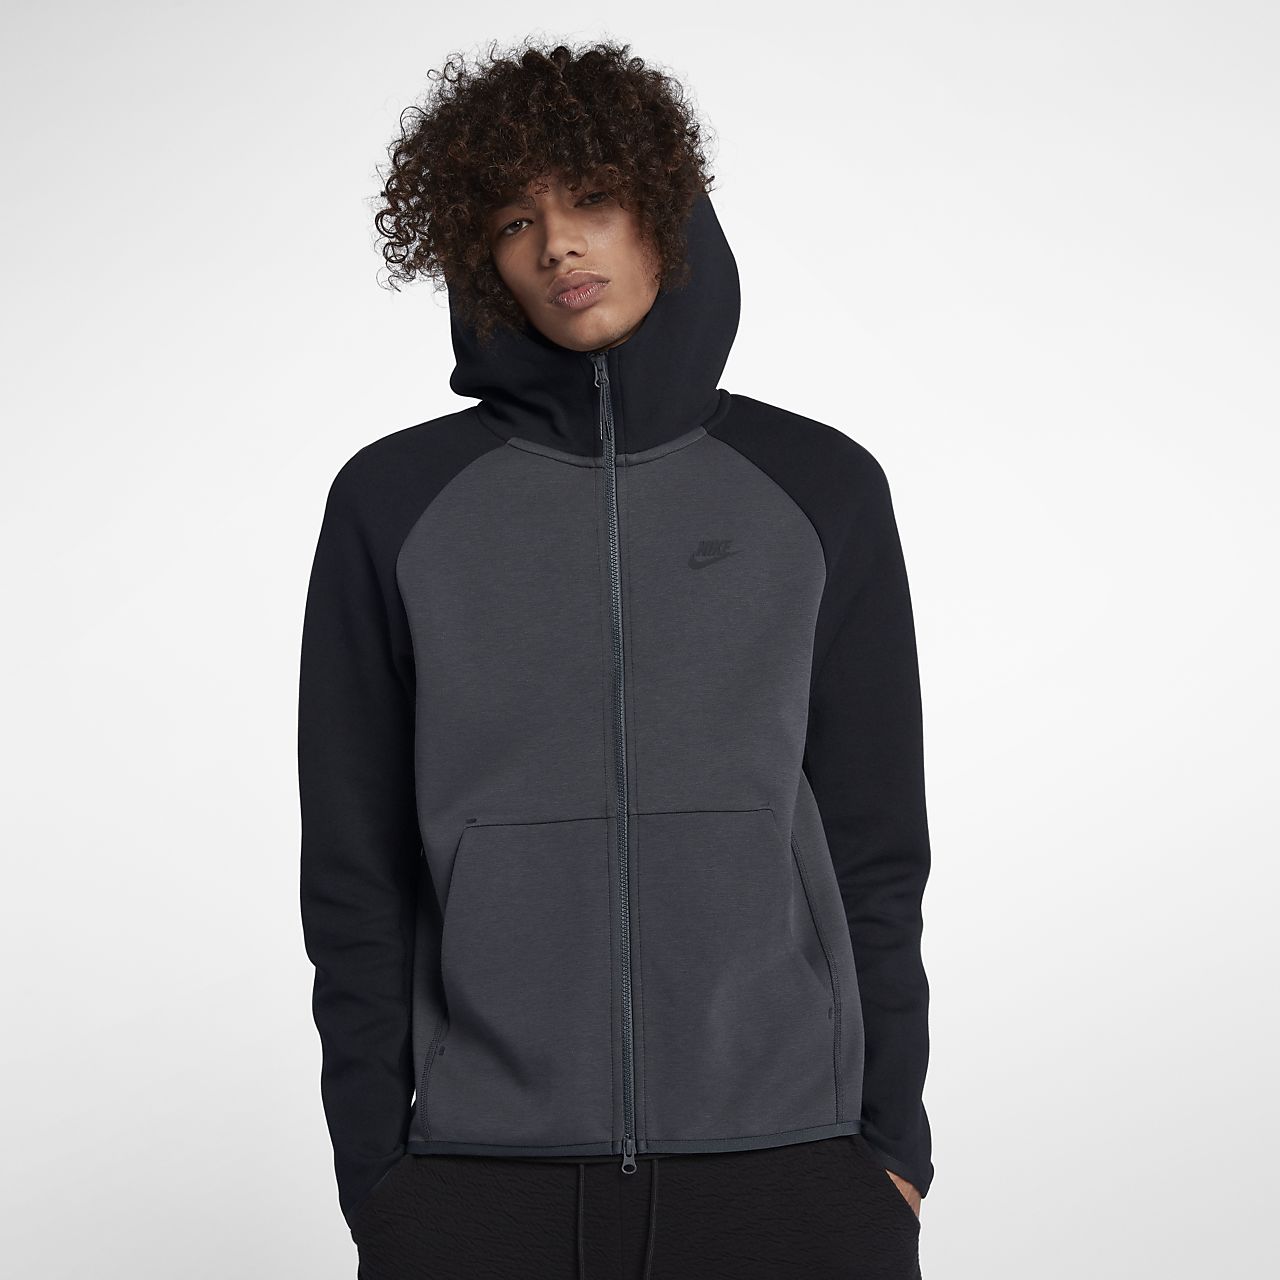 hooded tunic mens